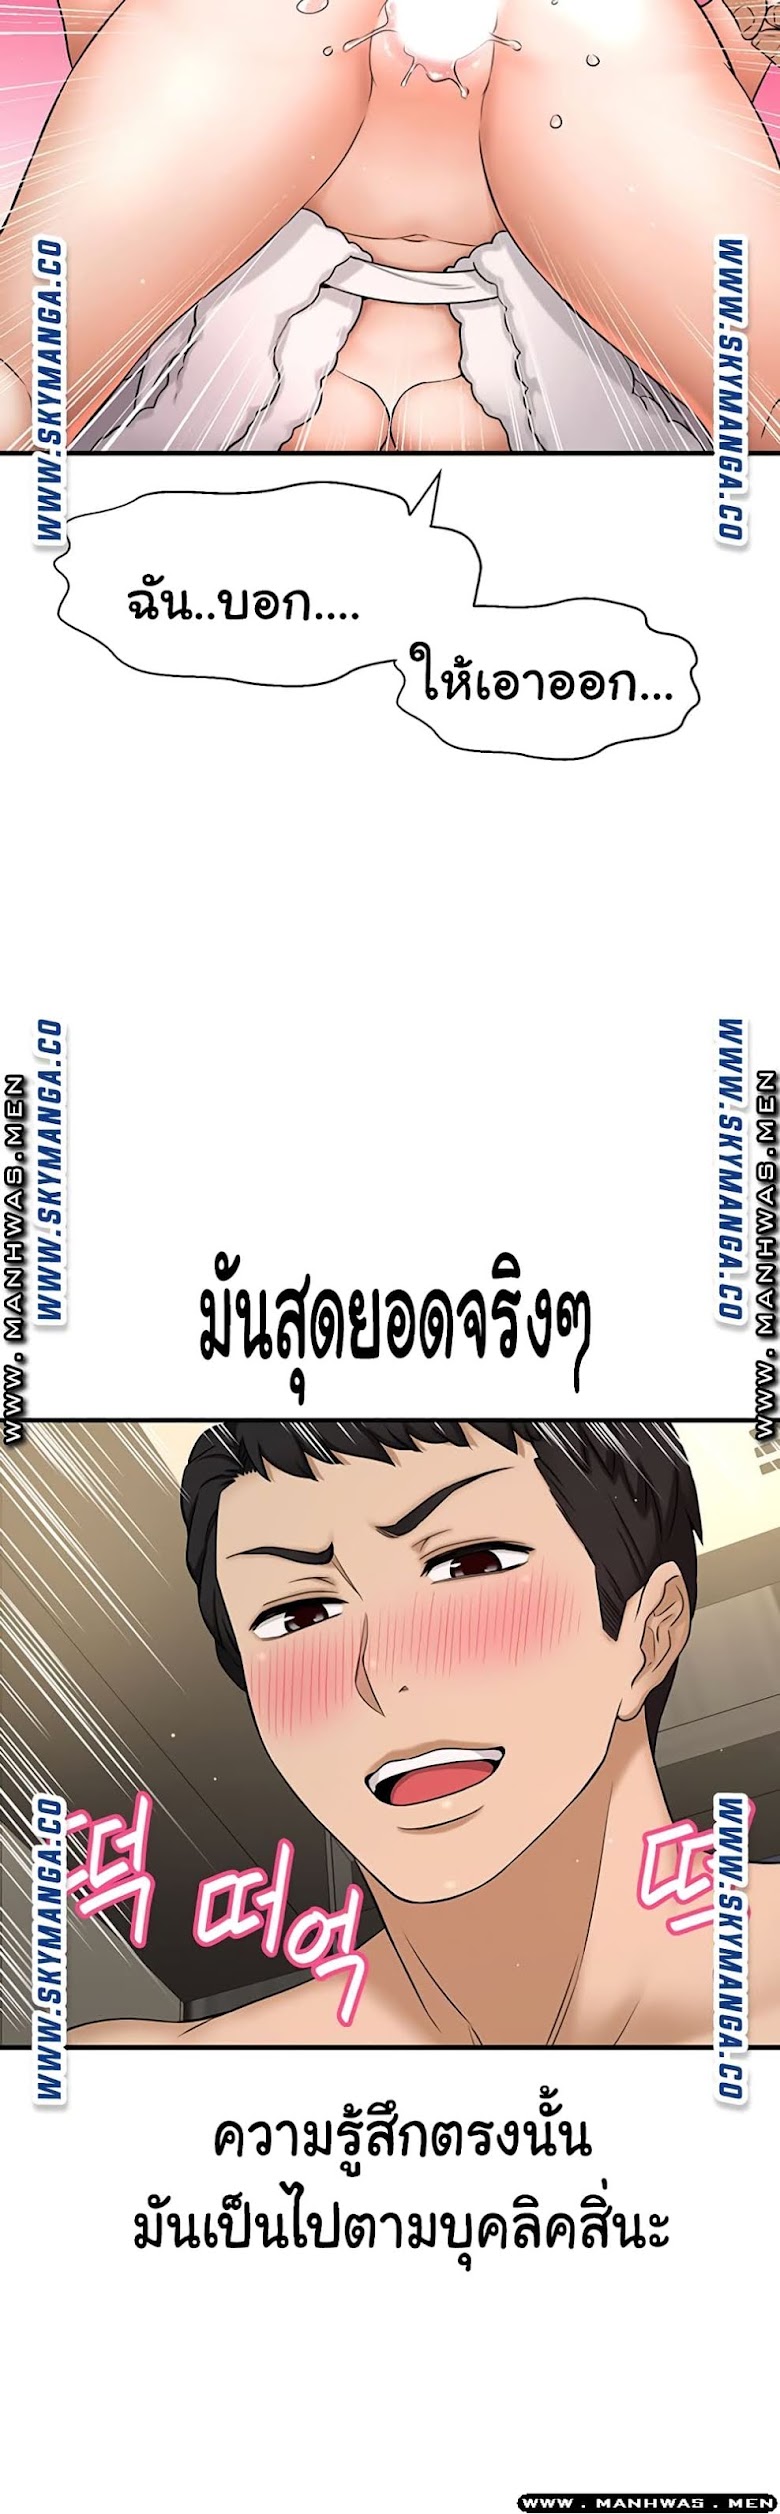 I Want to Know Her - หน้า 24